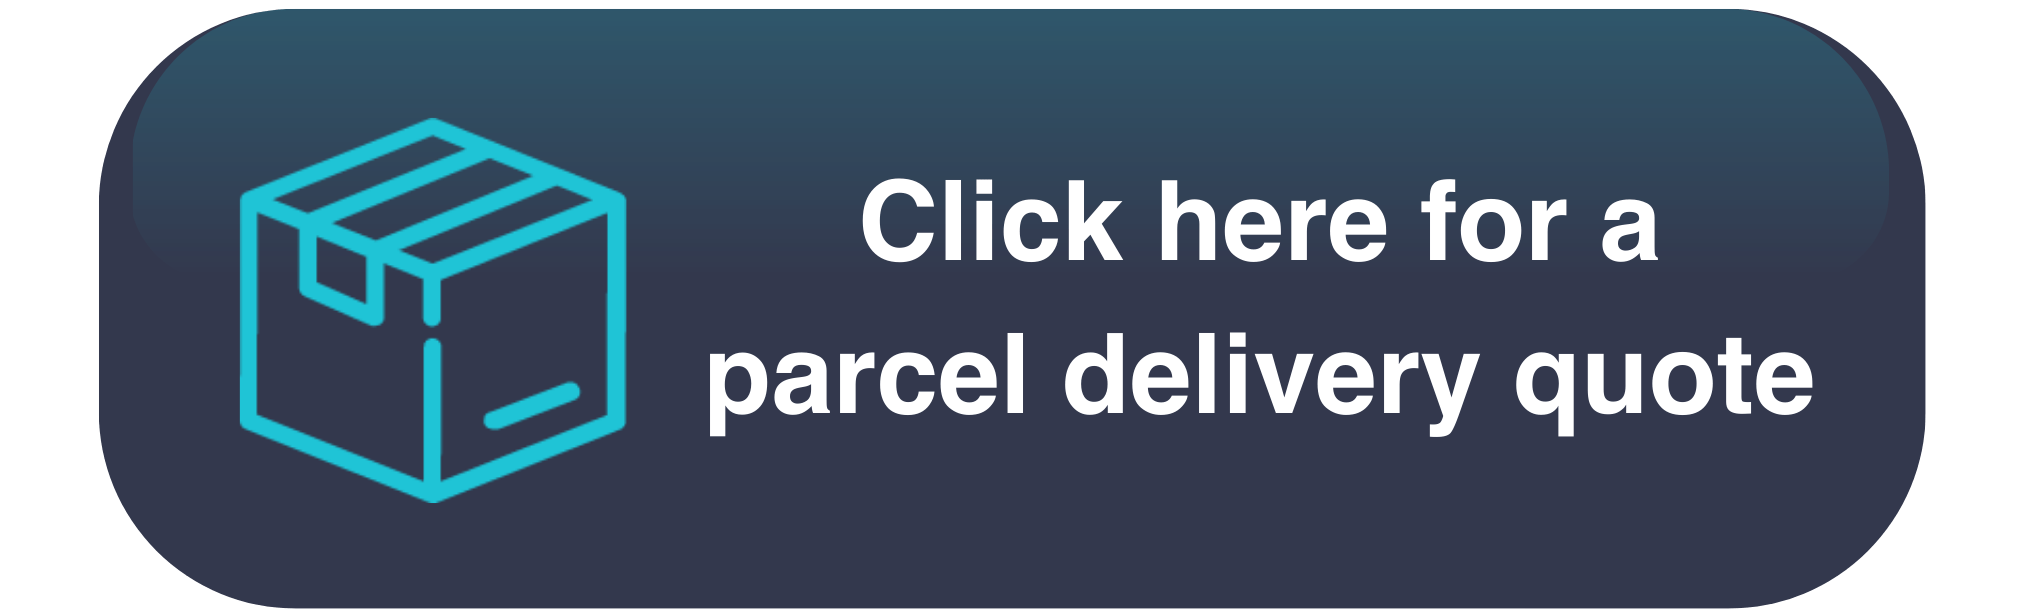 Click for parcel delivery quote